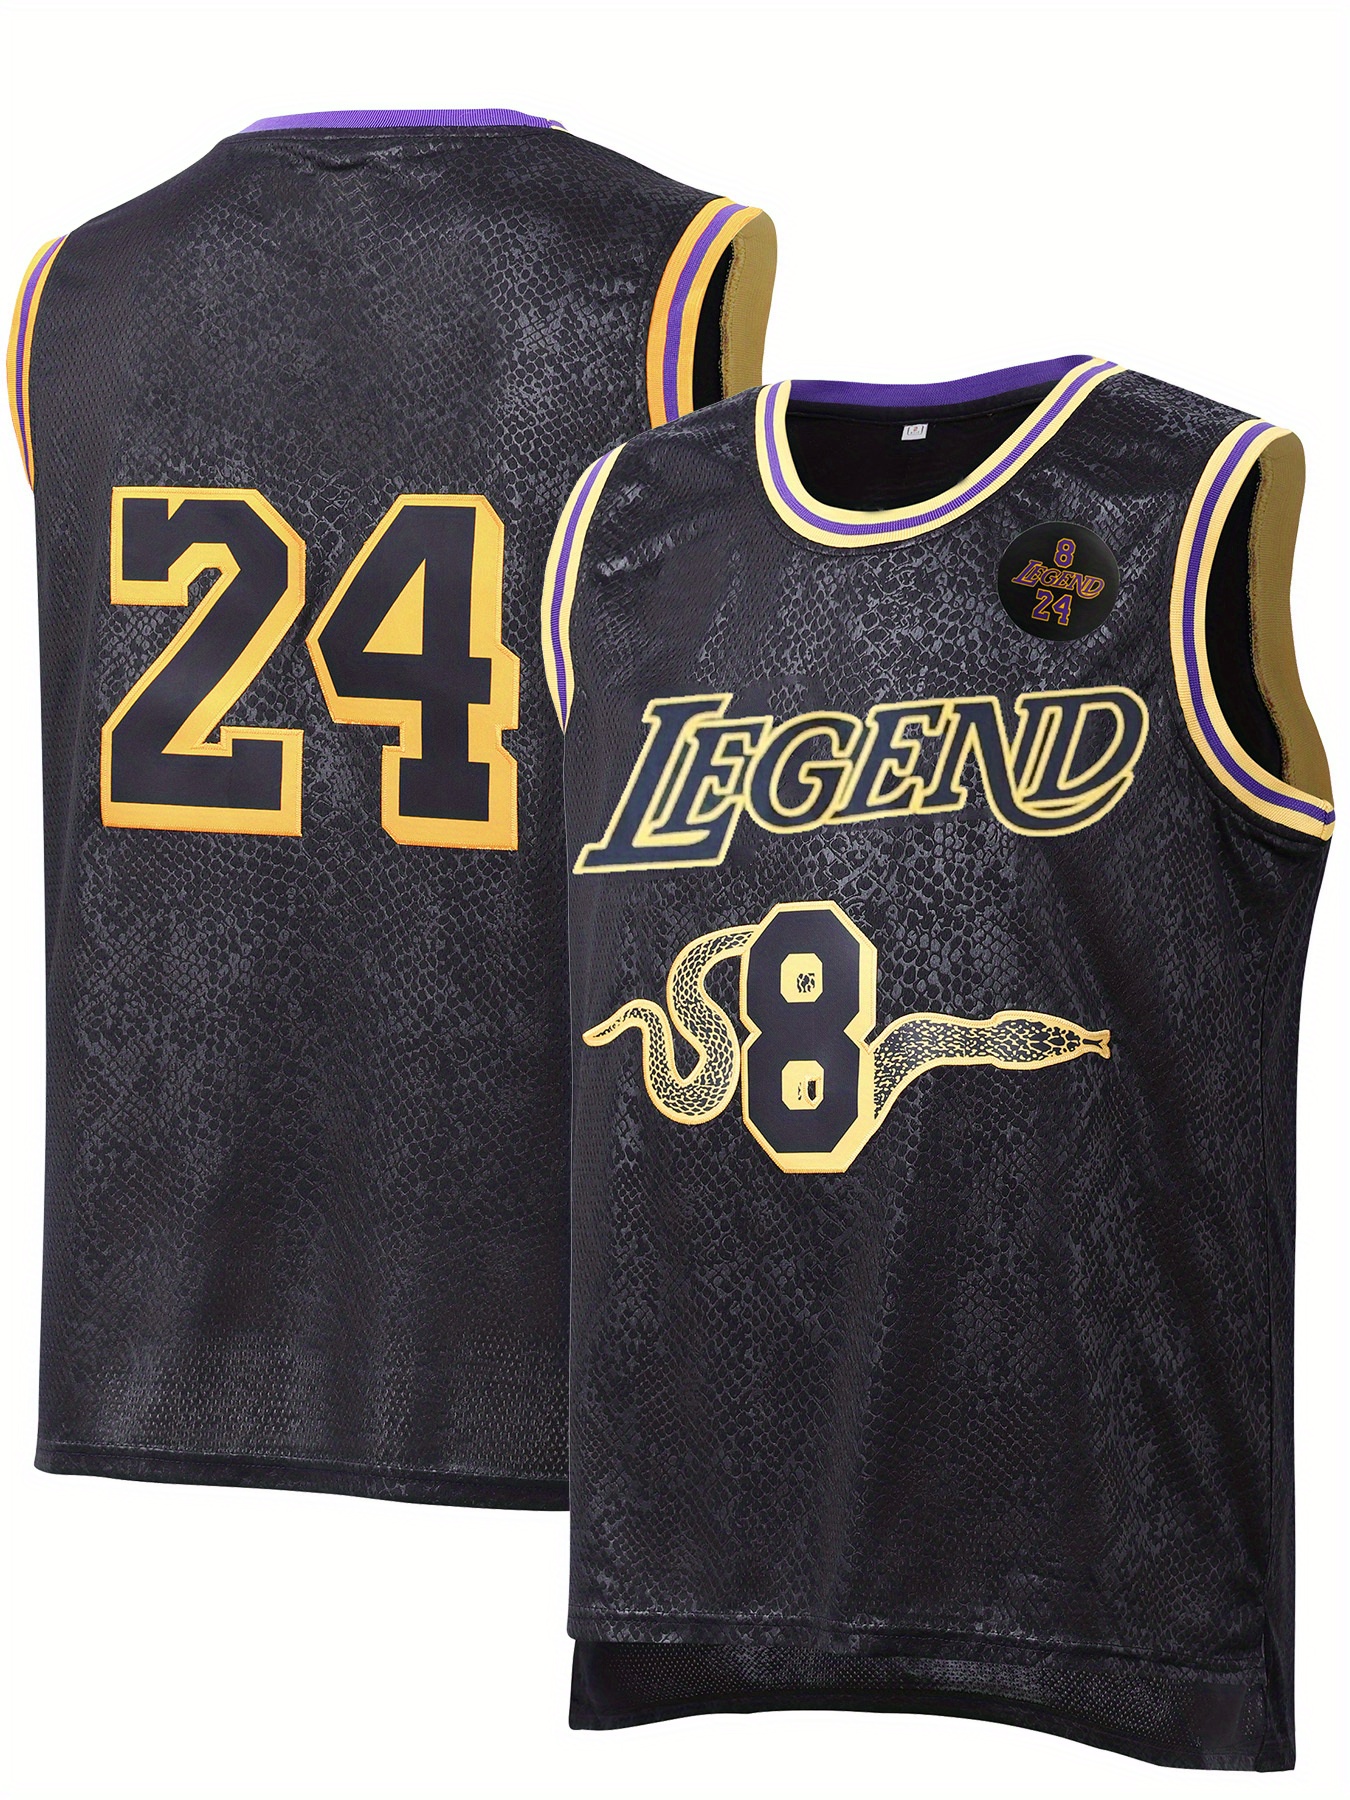 Men's Legend #824 Embroidered Basketball Jersey, Active Retro Round Neck Sleeveless Uniform Basketball Shirt for Training Competition,Temu